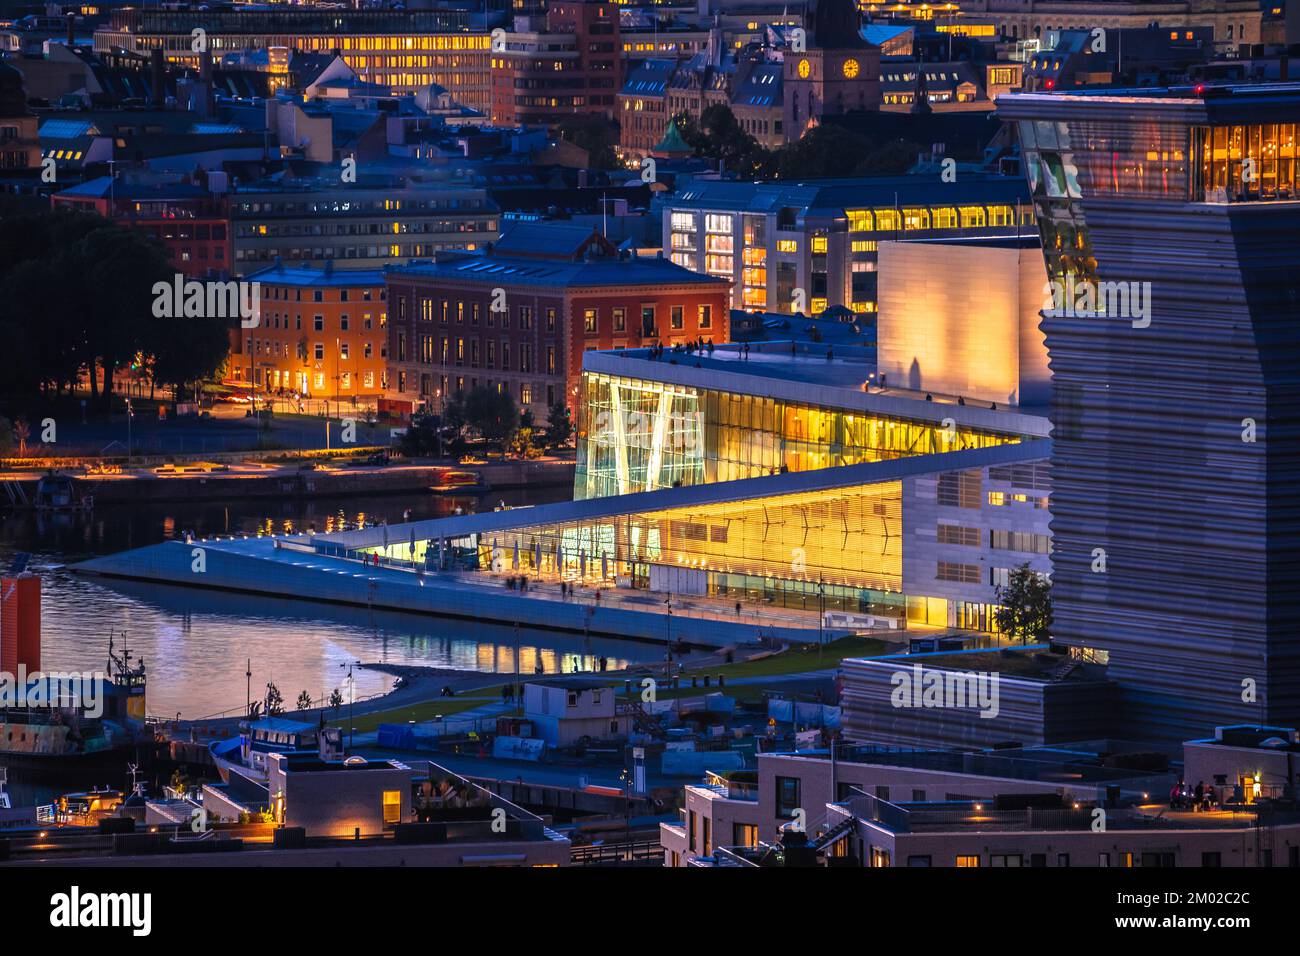 Oslo Opera house and city center modern architecture evening view, capital of Norway Stock Photo